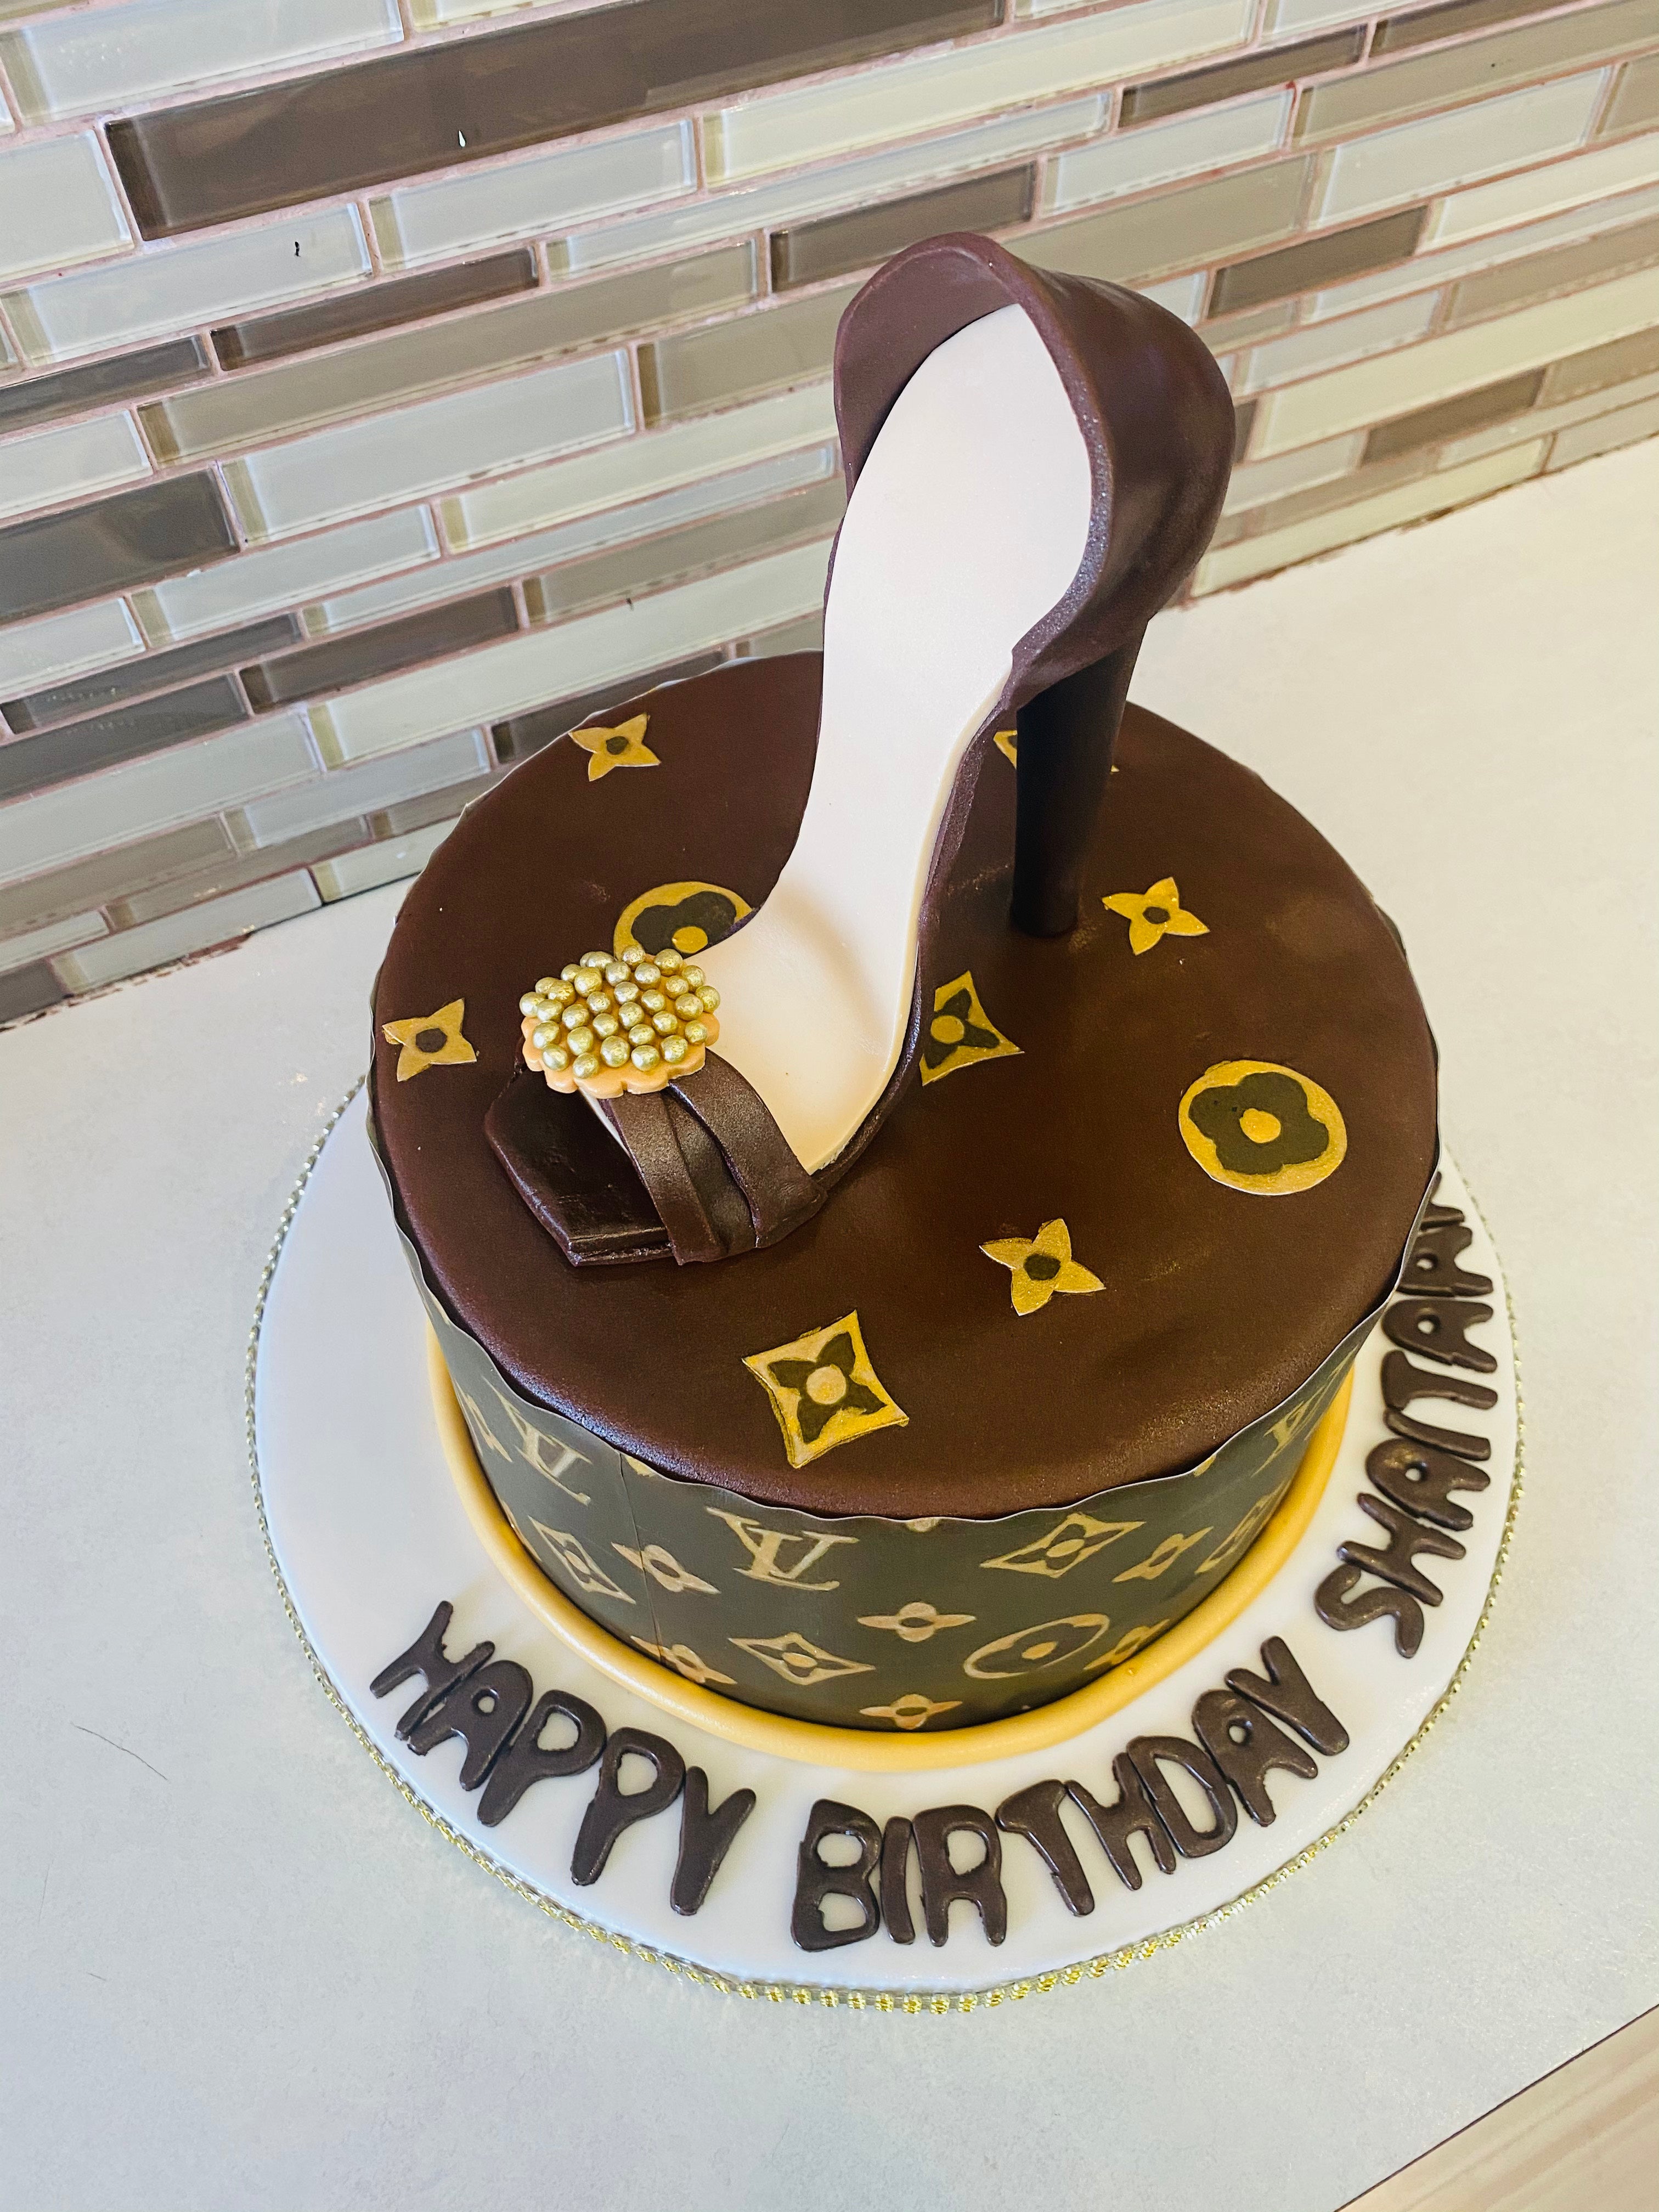 Louis Vuitton Inspired Birthday Cake with Edible image. Size : 6 inches  round Red velvet Cake Frosting/filling.: cream cheese, and homemade fondant  We, By Merlee's Bakeshop